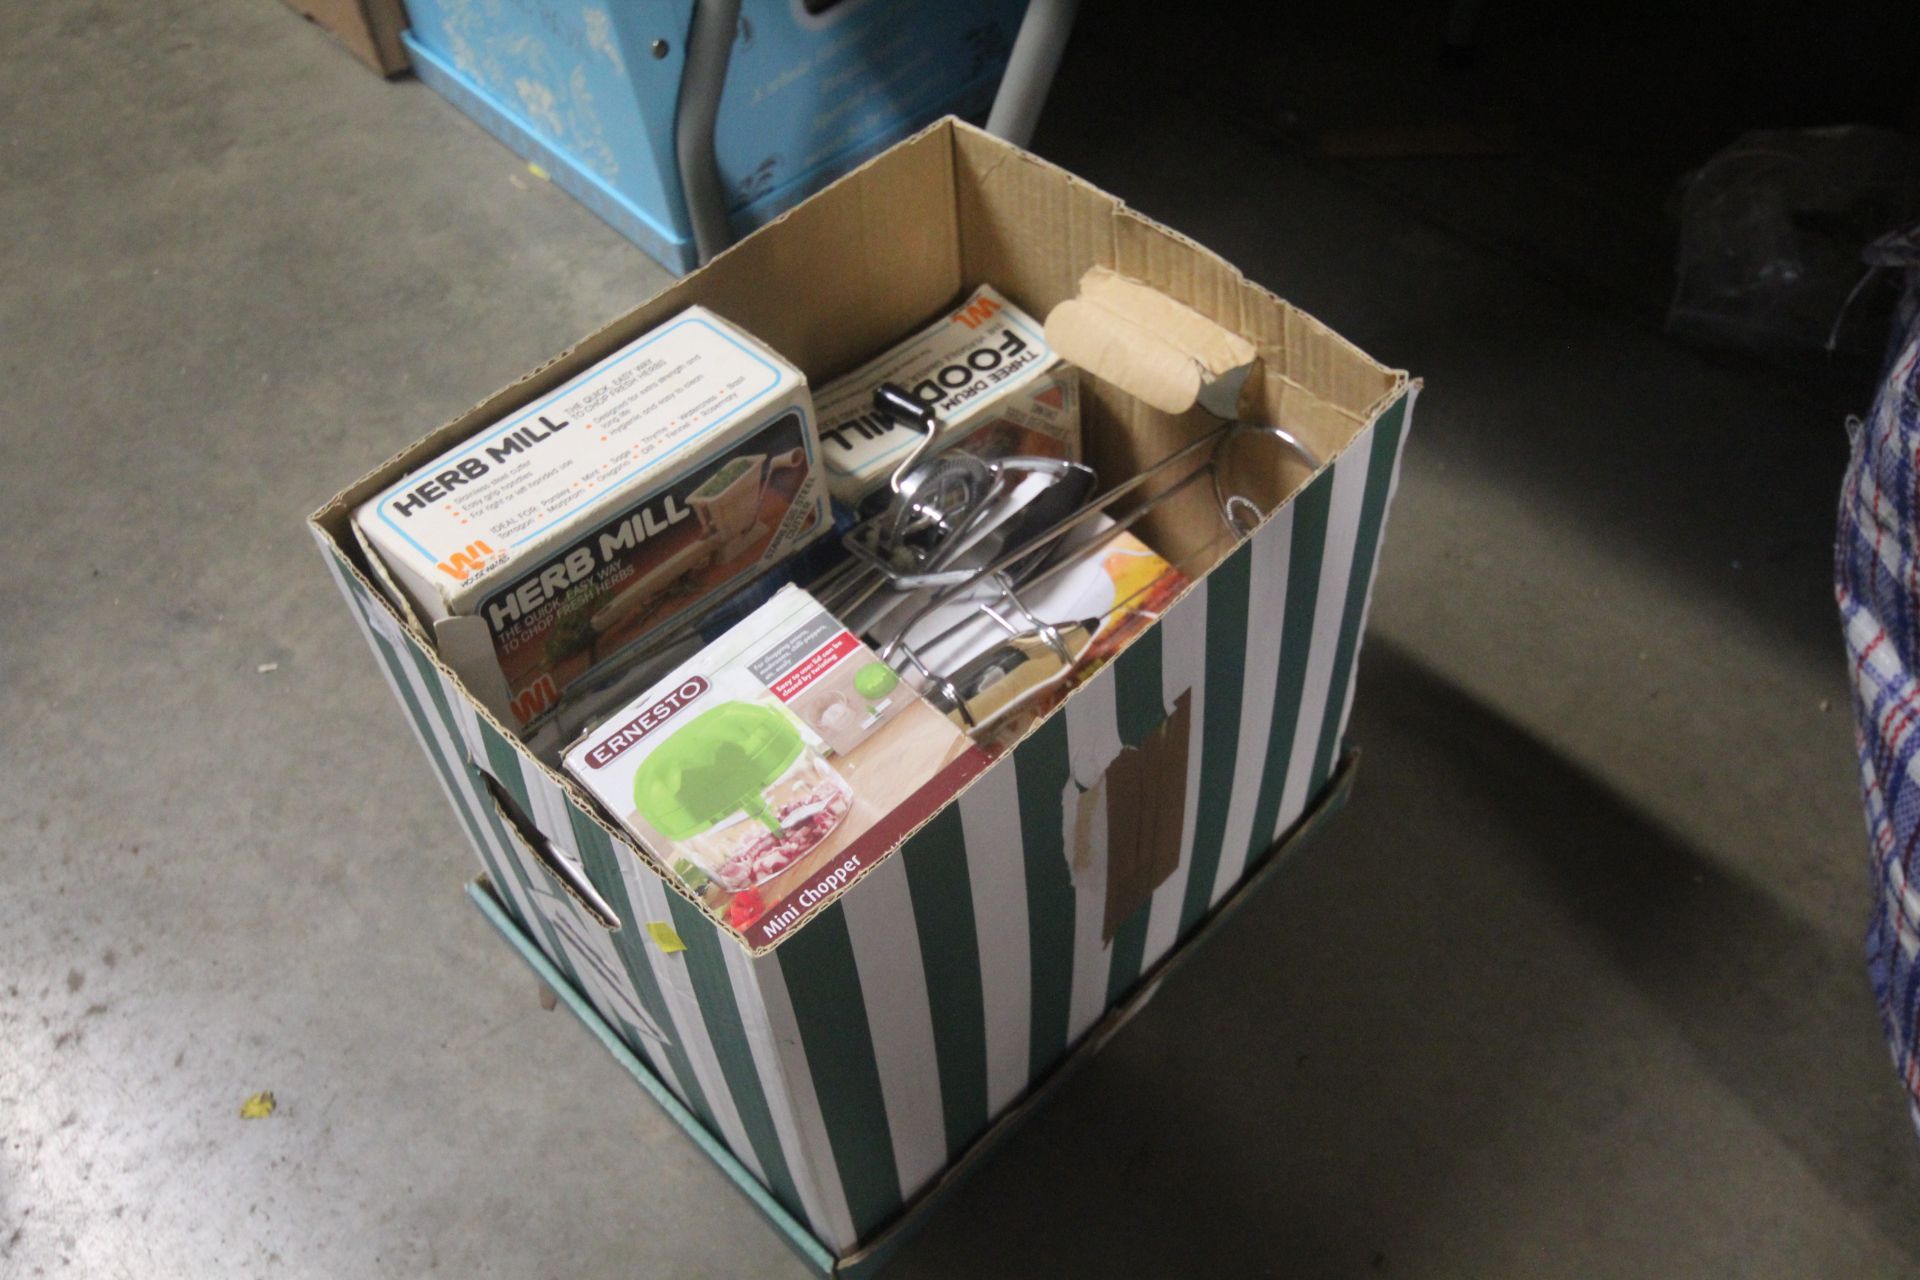 A box of various food mixer items and accessories